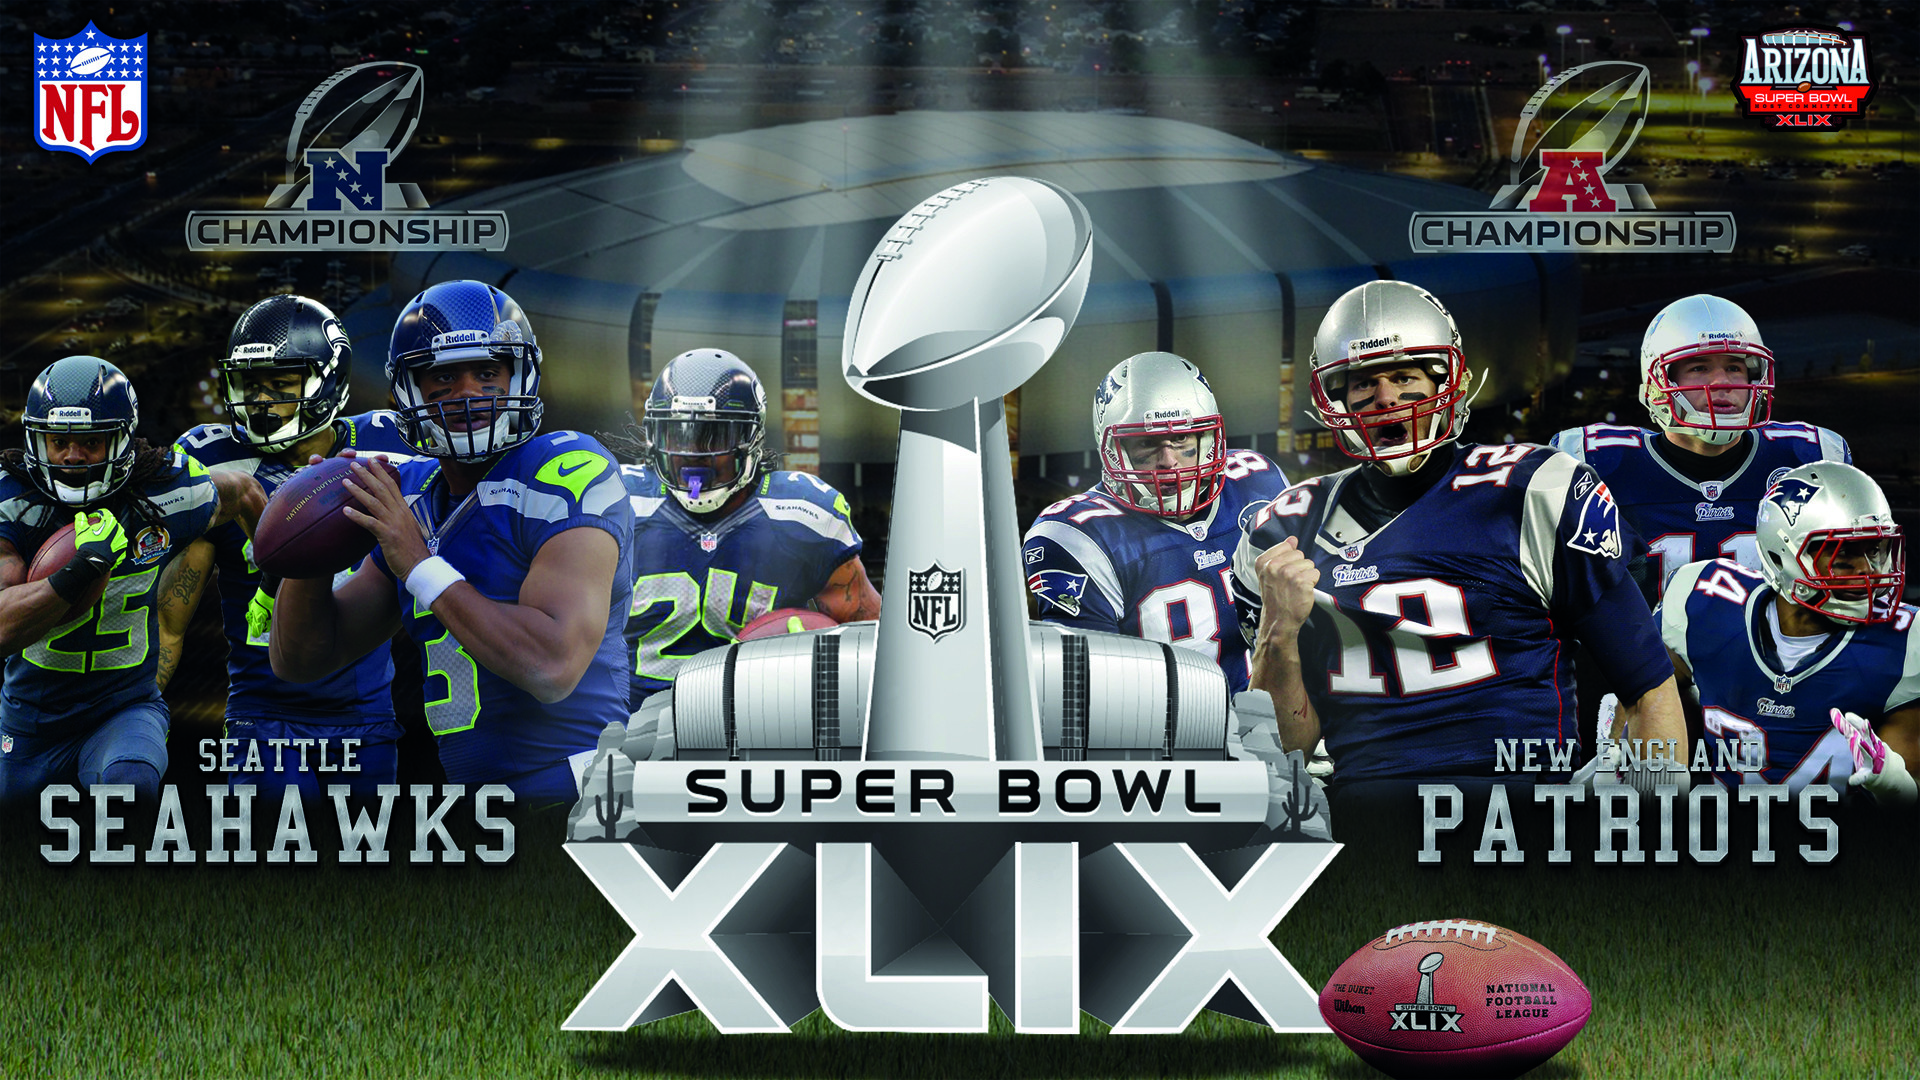 1920x1080 SUPER BOWL 50 WALLPAPERS FREE Wallpapers Background images 